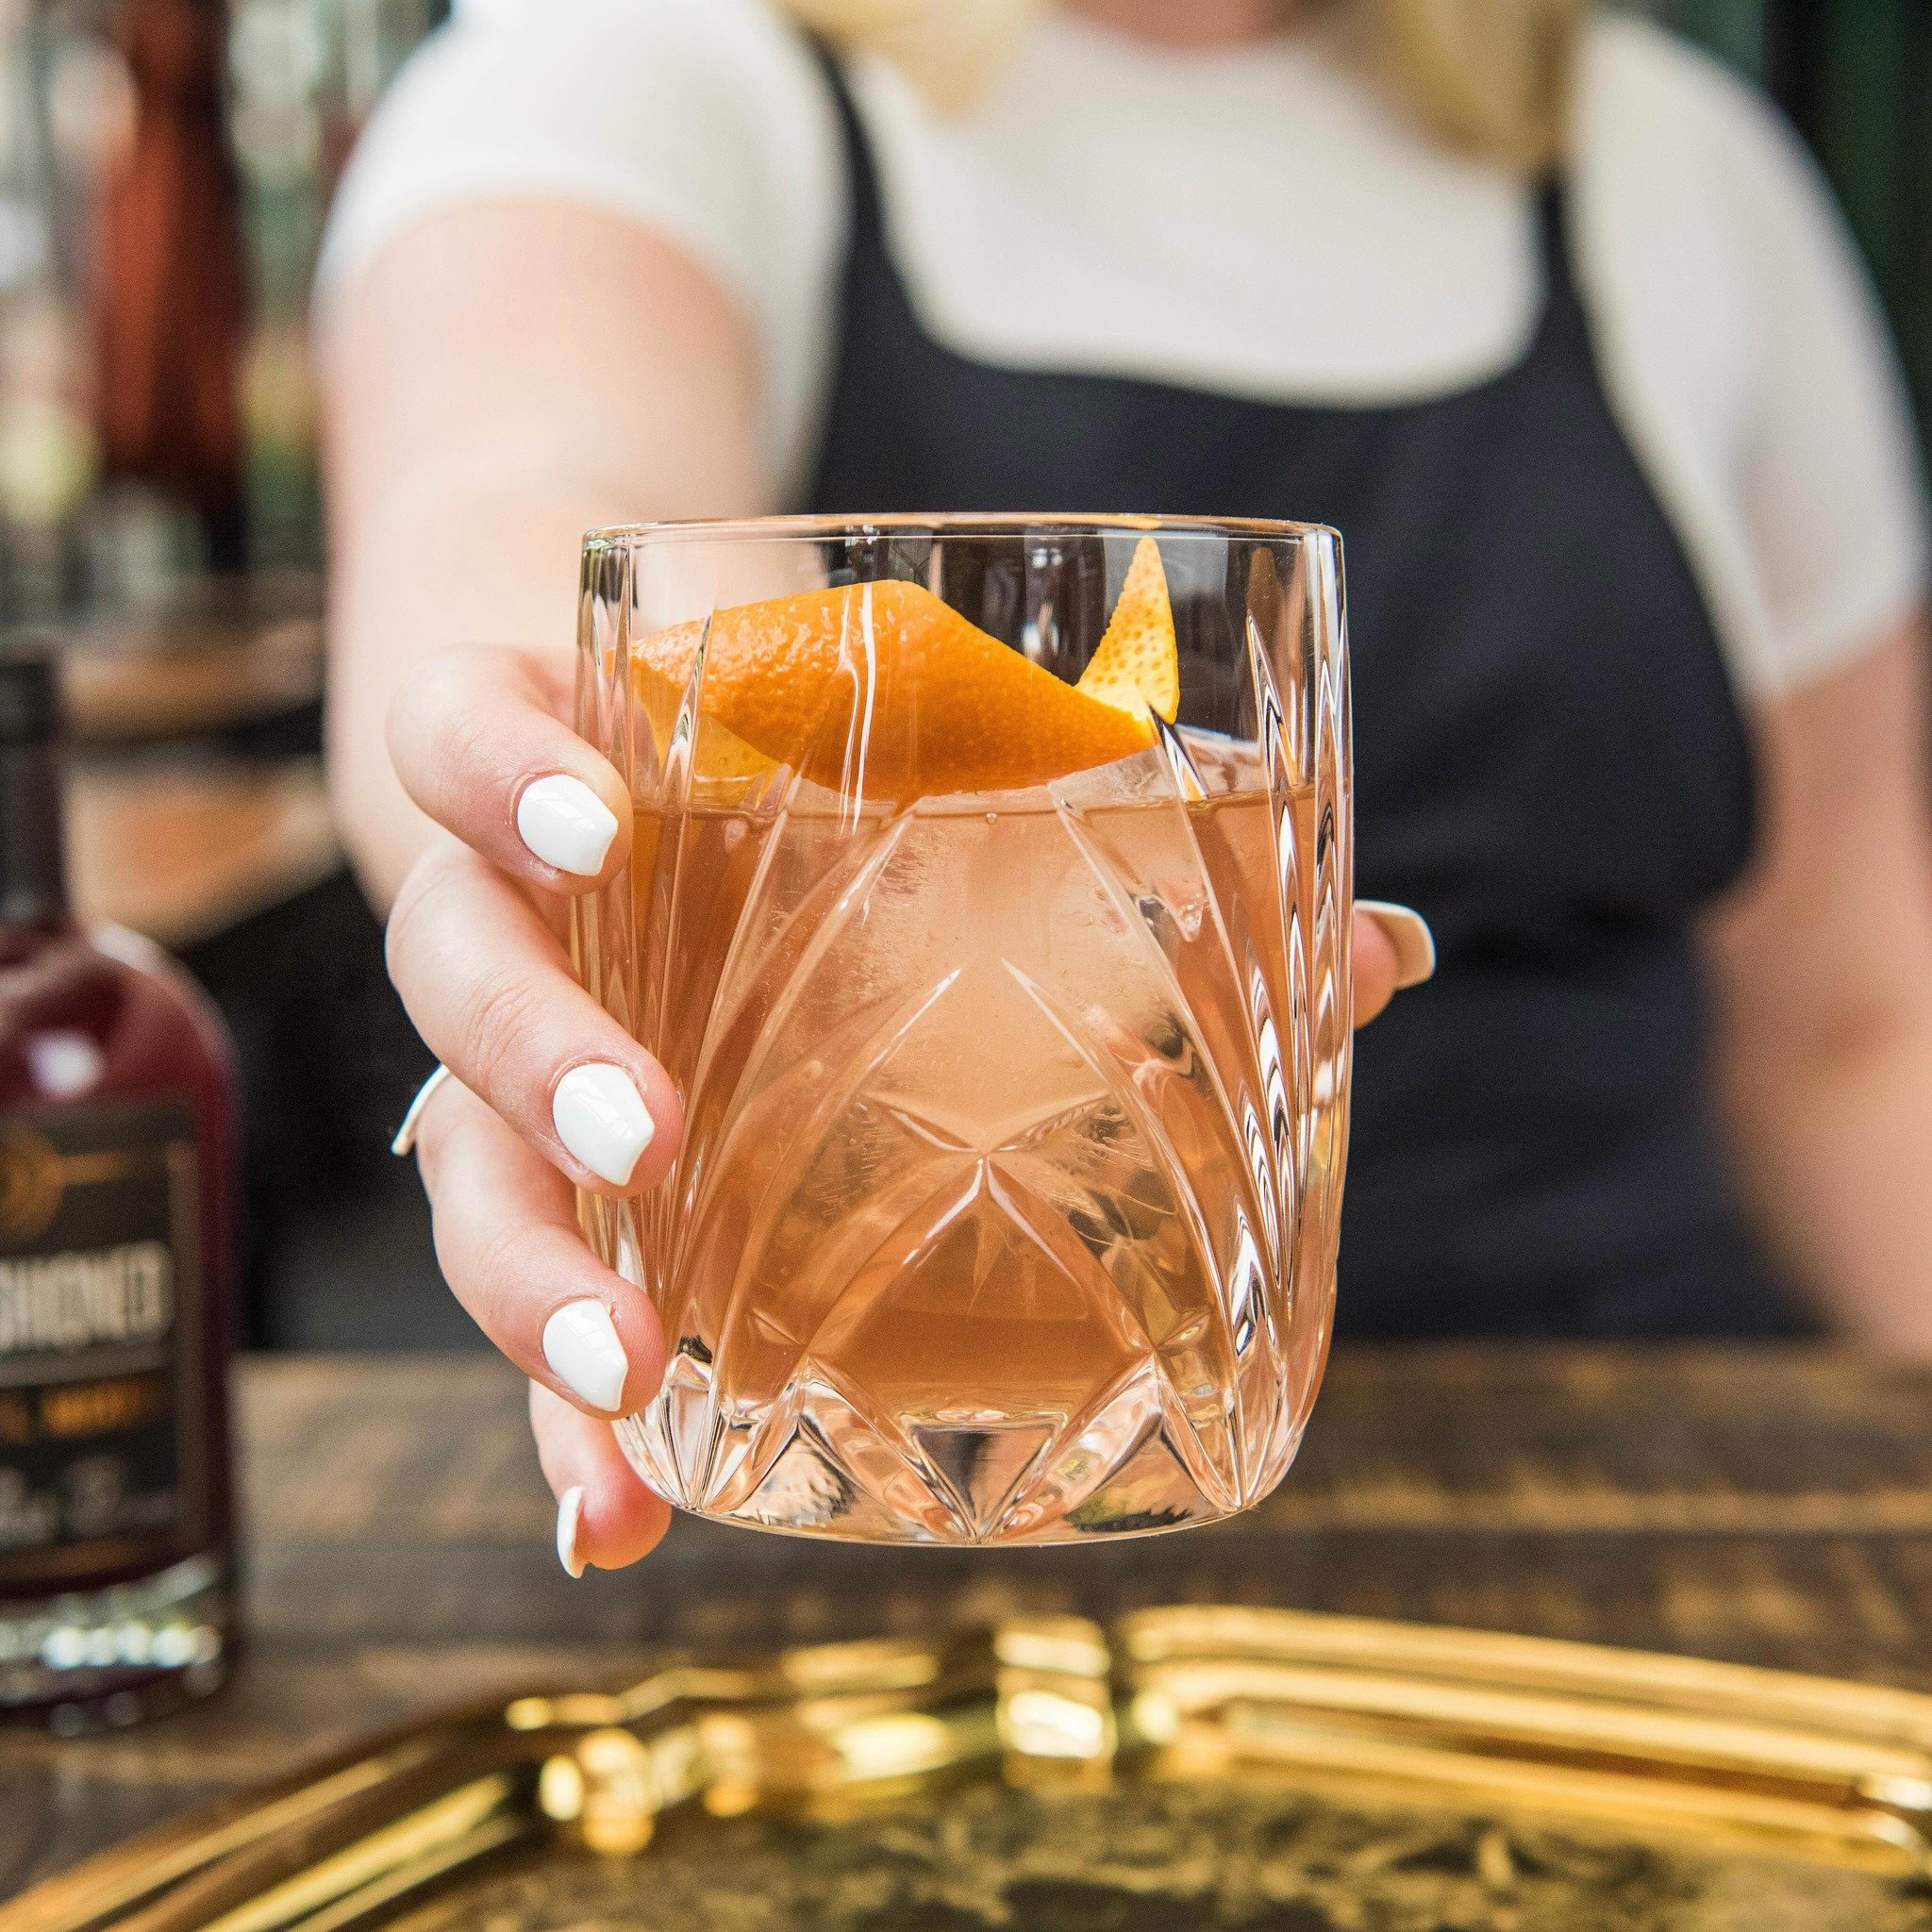 Old-fashioned charm in a glass. The timeless taste and classic vibes of the Anejo Old Fashioned is truly unmatched. To find your nearest location, visit us online at https://www.Moctezumas.com/.